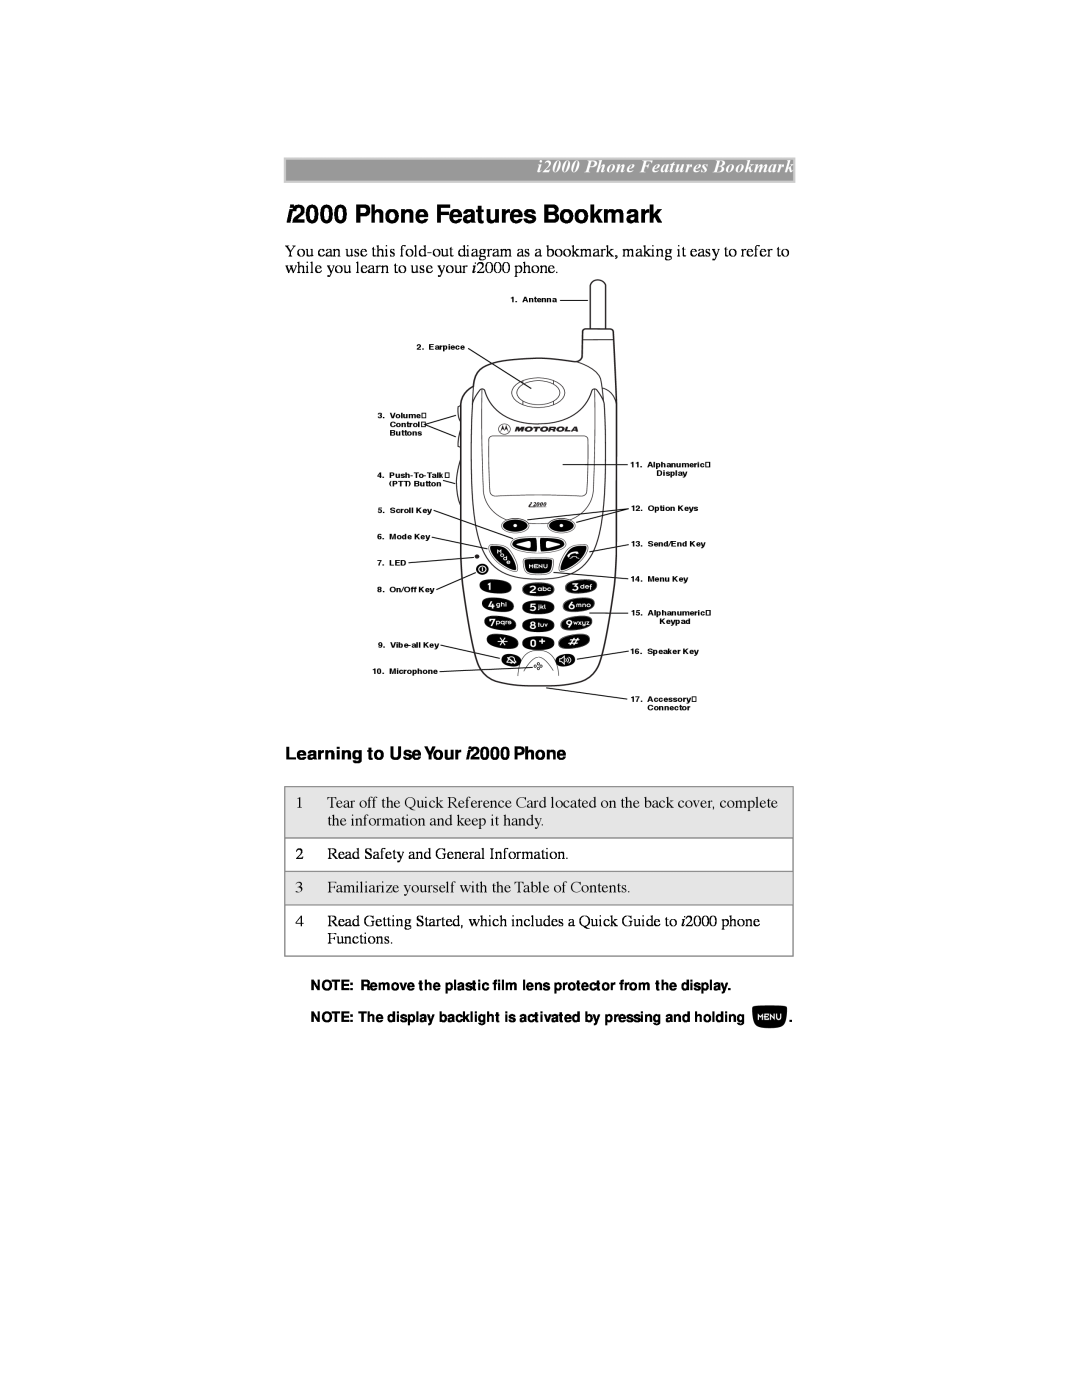 Motorola iDEN manual i2000 Phone Features Bookmark, Learning to Use Your i2000 Phone 